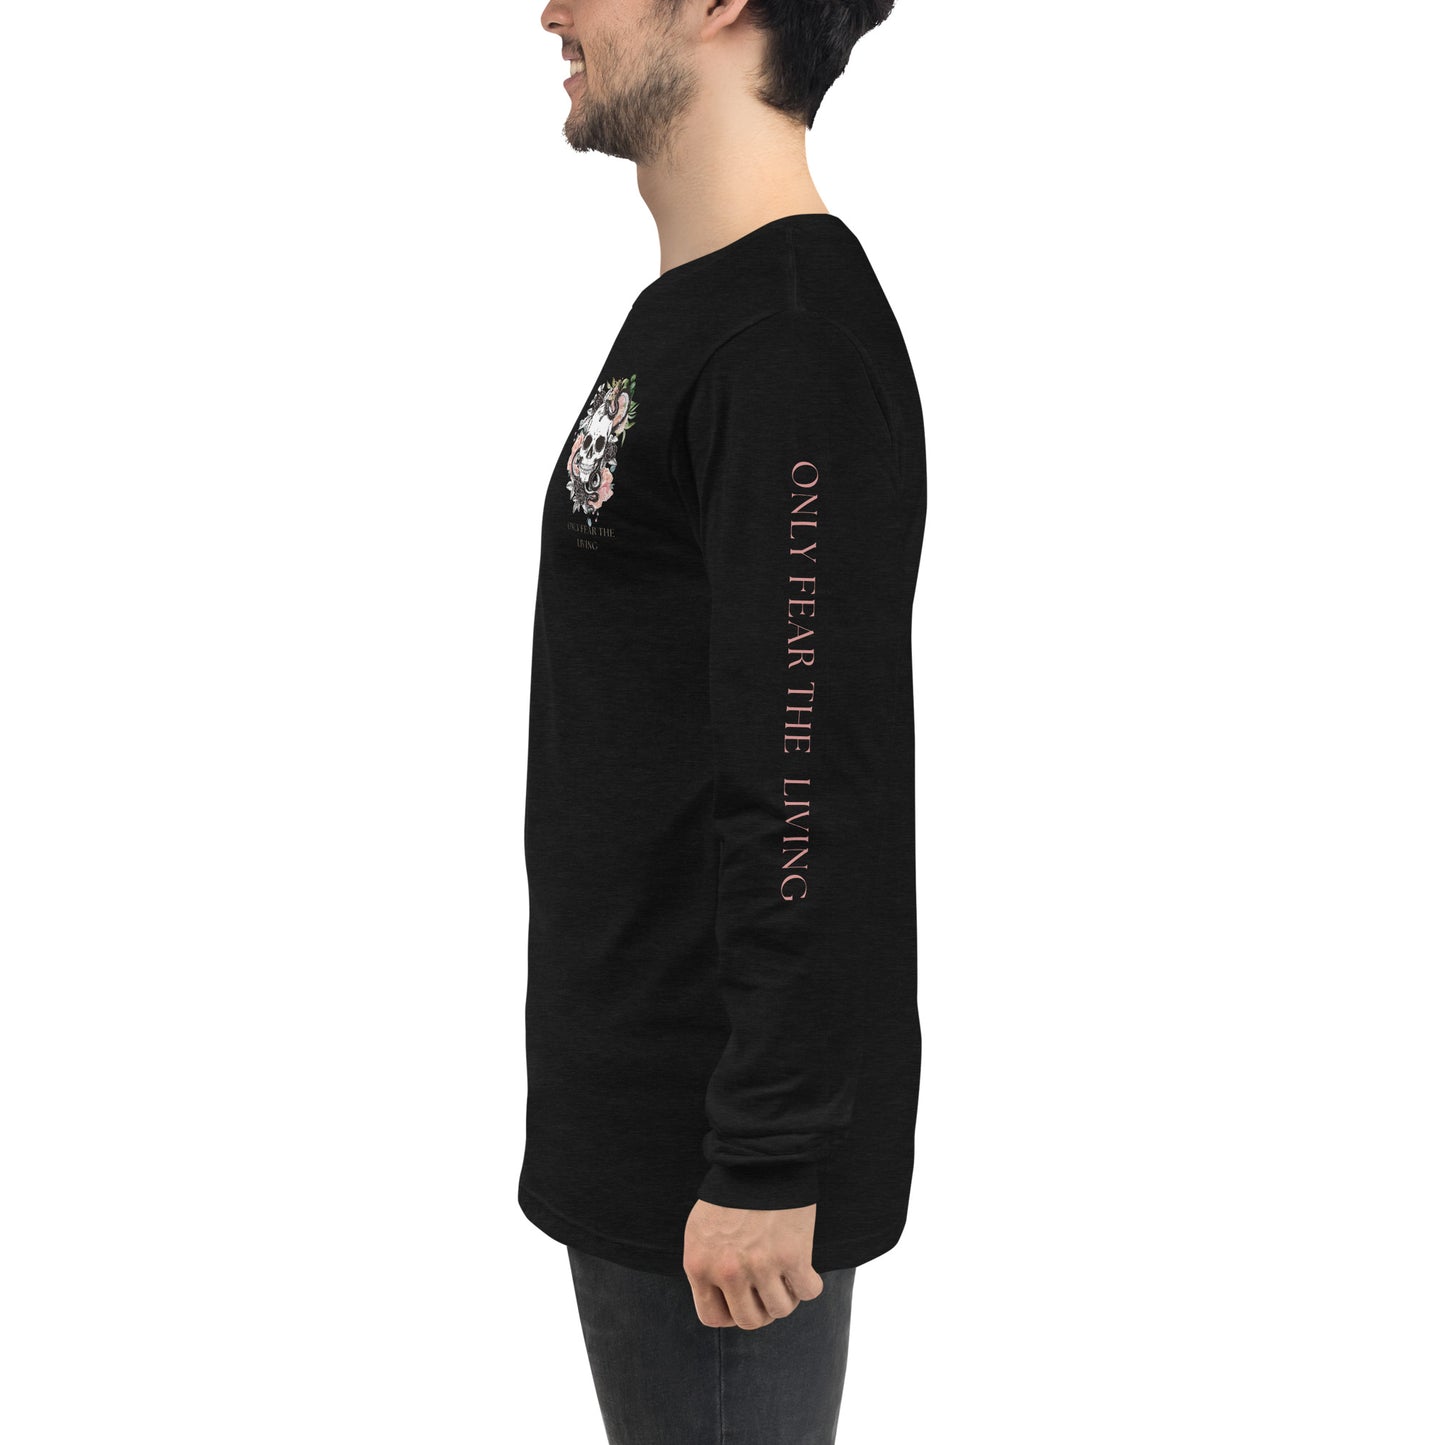 Only Fear the Living Long Sleeve Tee